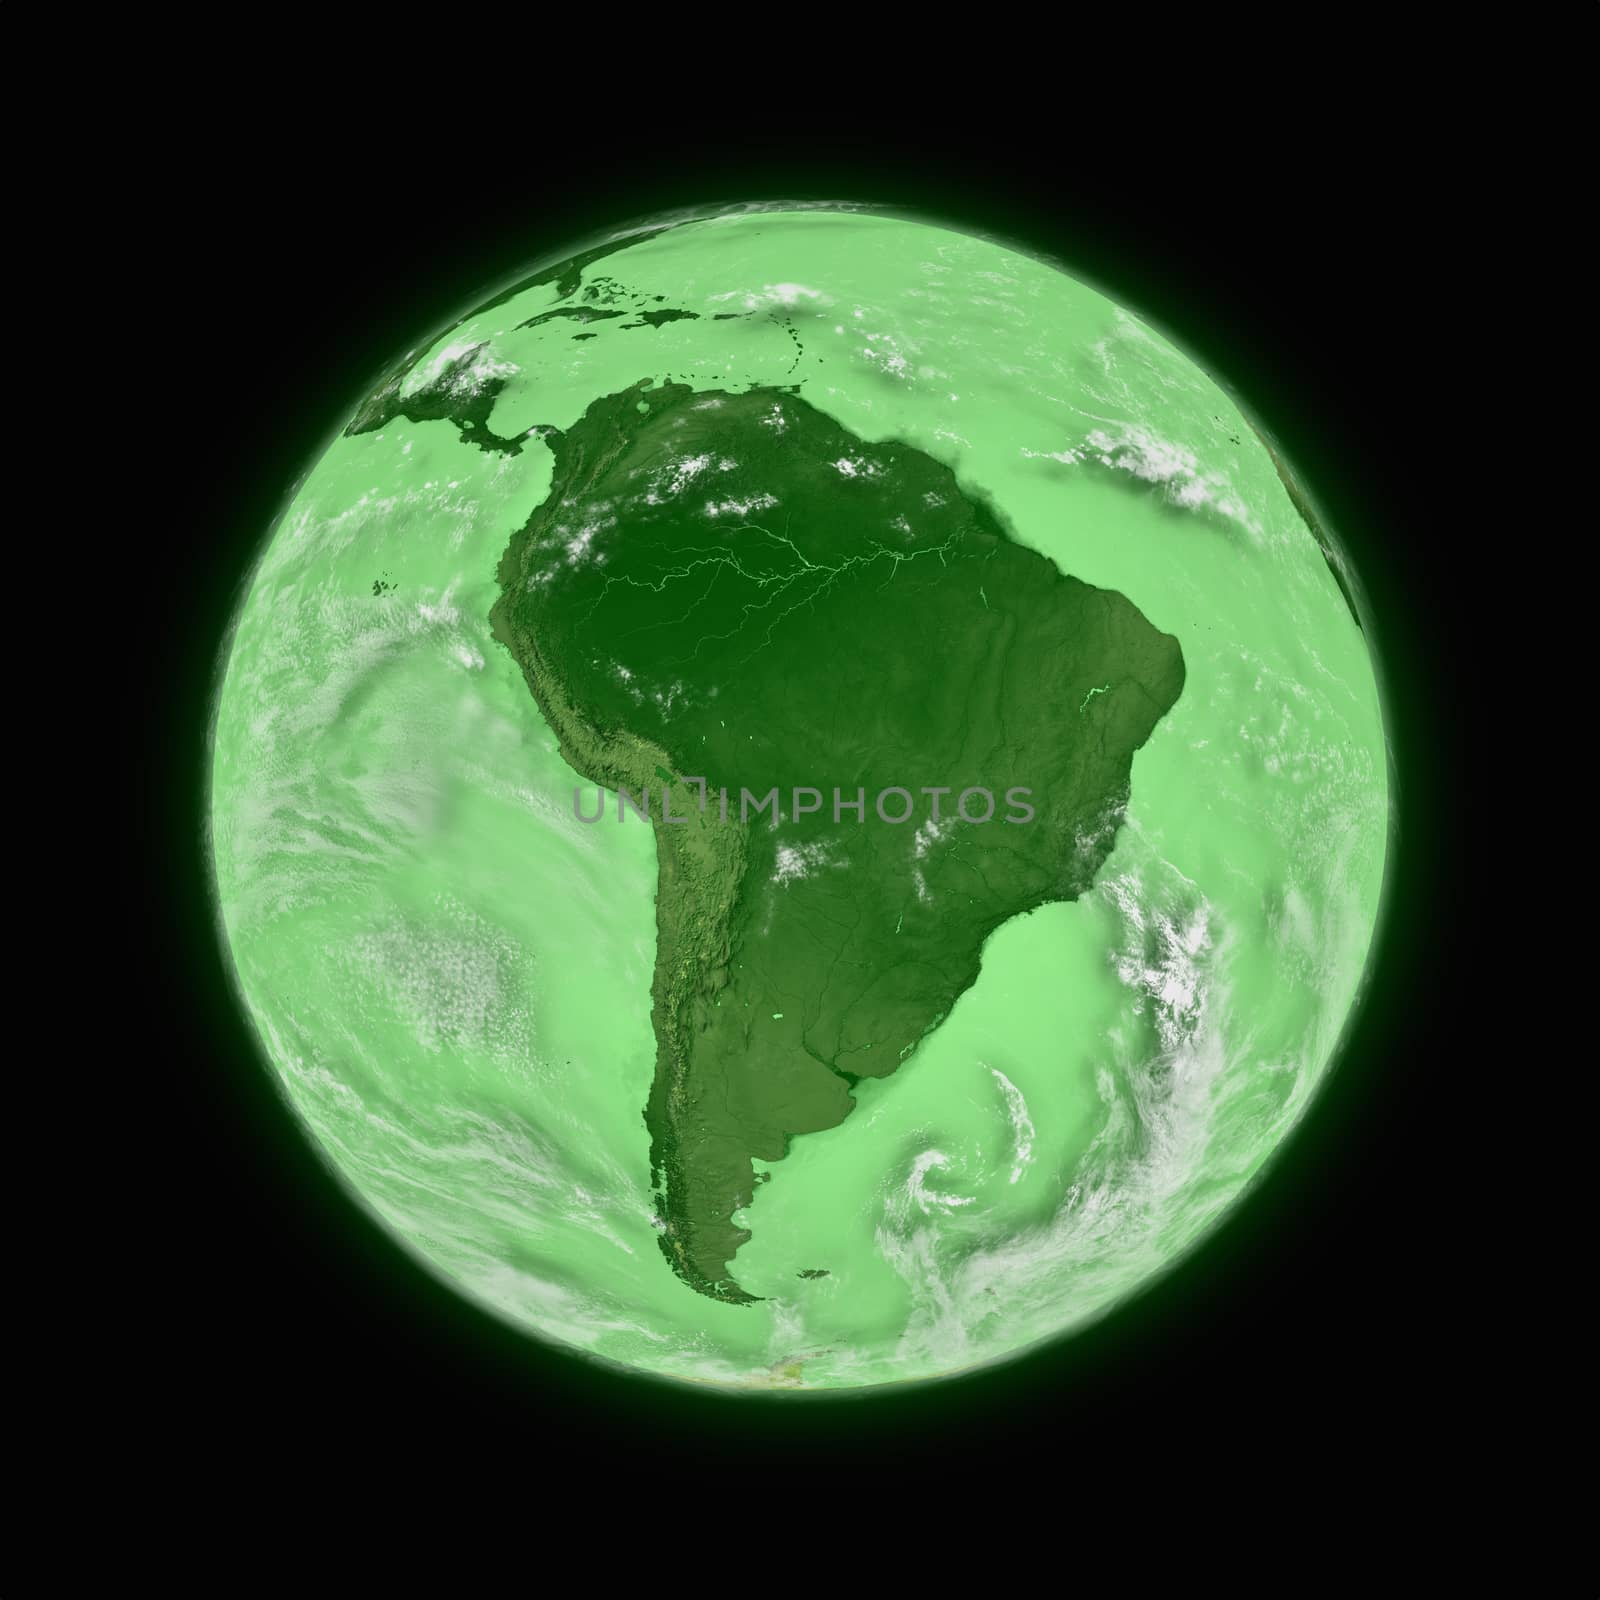 South America on green planet Earth isolated on black background. Highly detailed planet surface. Elements of this image furnished by NASA.